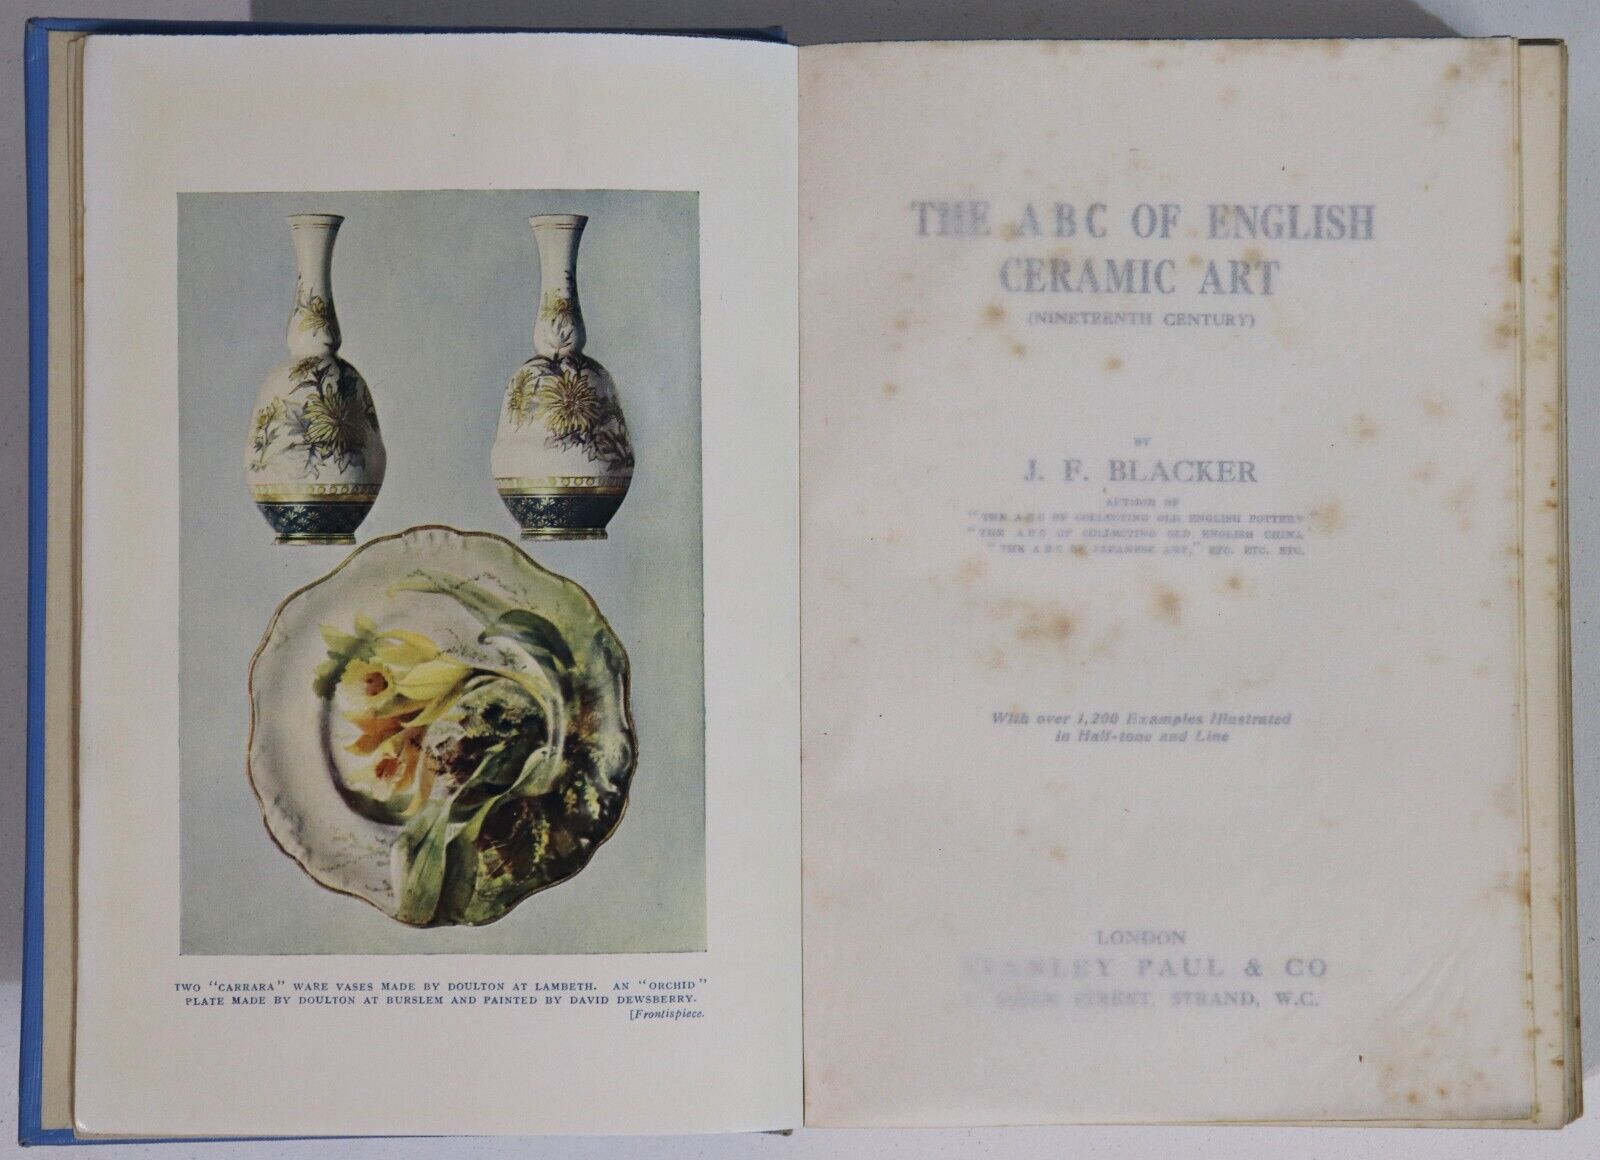 The ABC Of English Ceramic Art - c1920 - Antique & Collectible Reference Book - 0